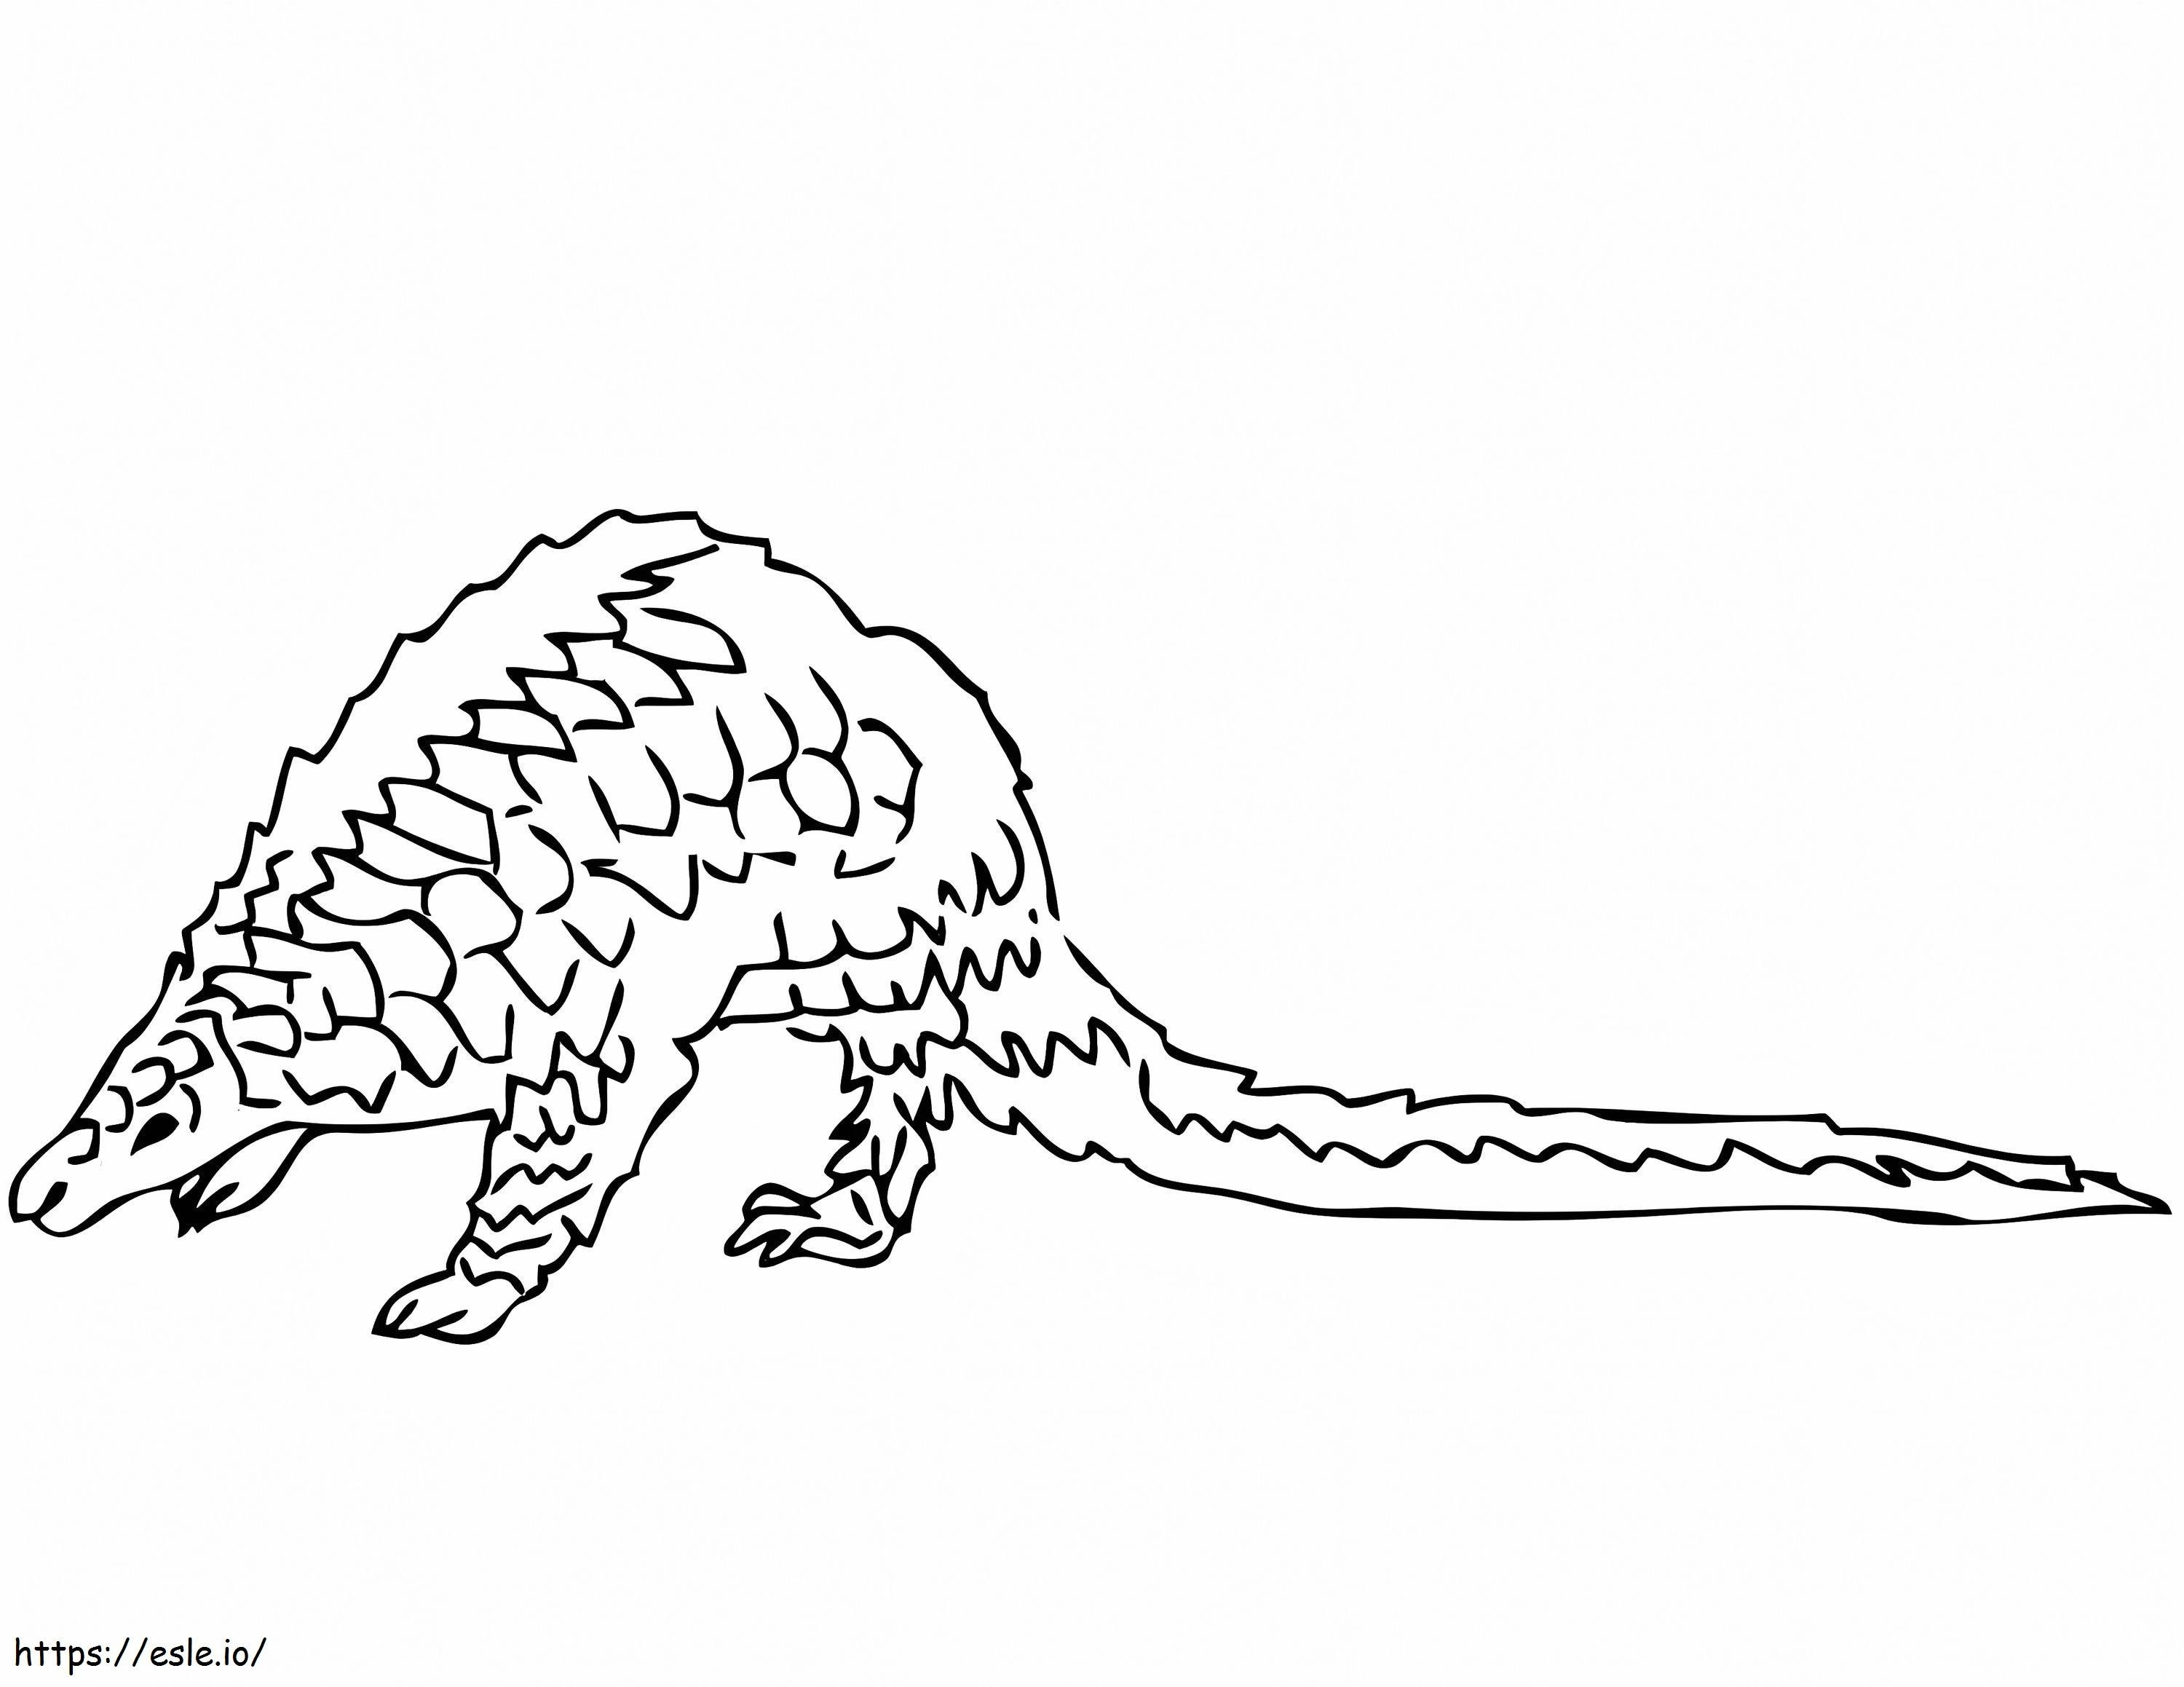 Simple Pangolin coloring page